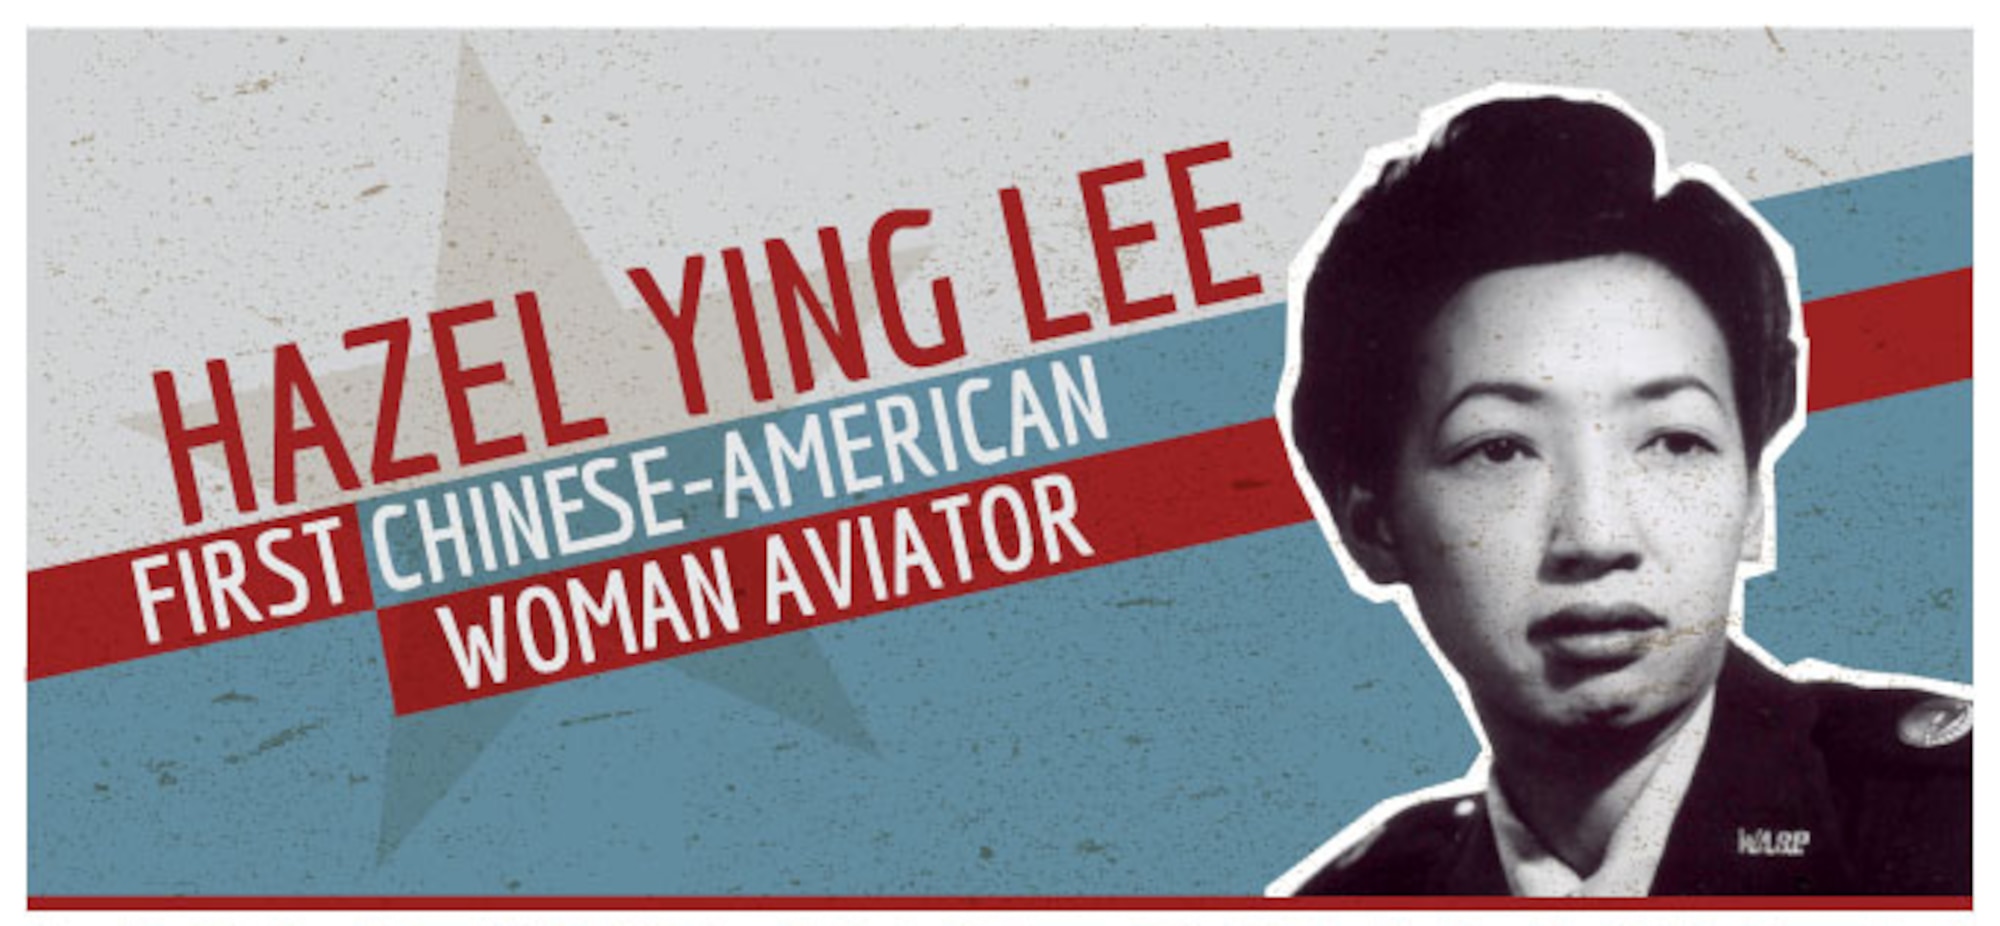 Graphic created highlighting Betty Gillies, the first Chinese-American woman aviator.